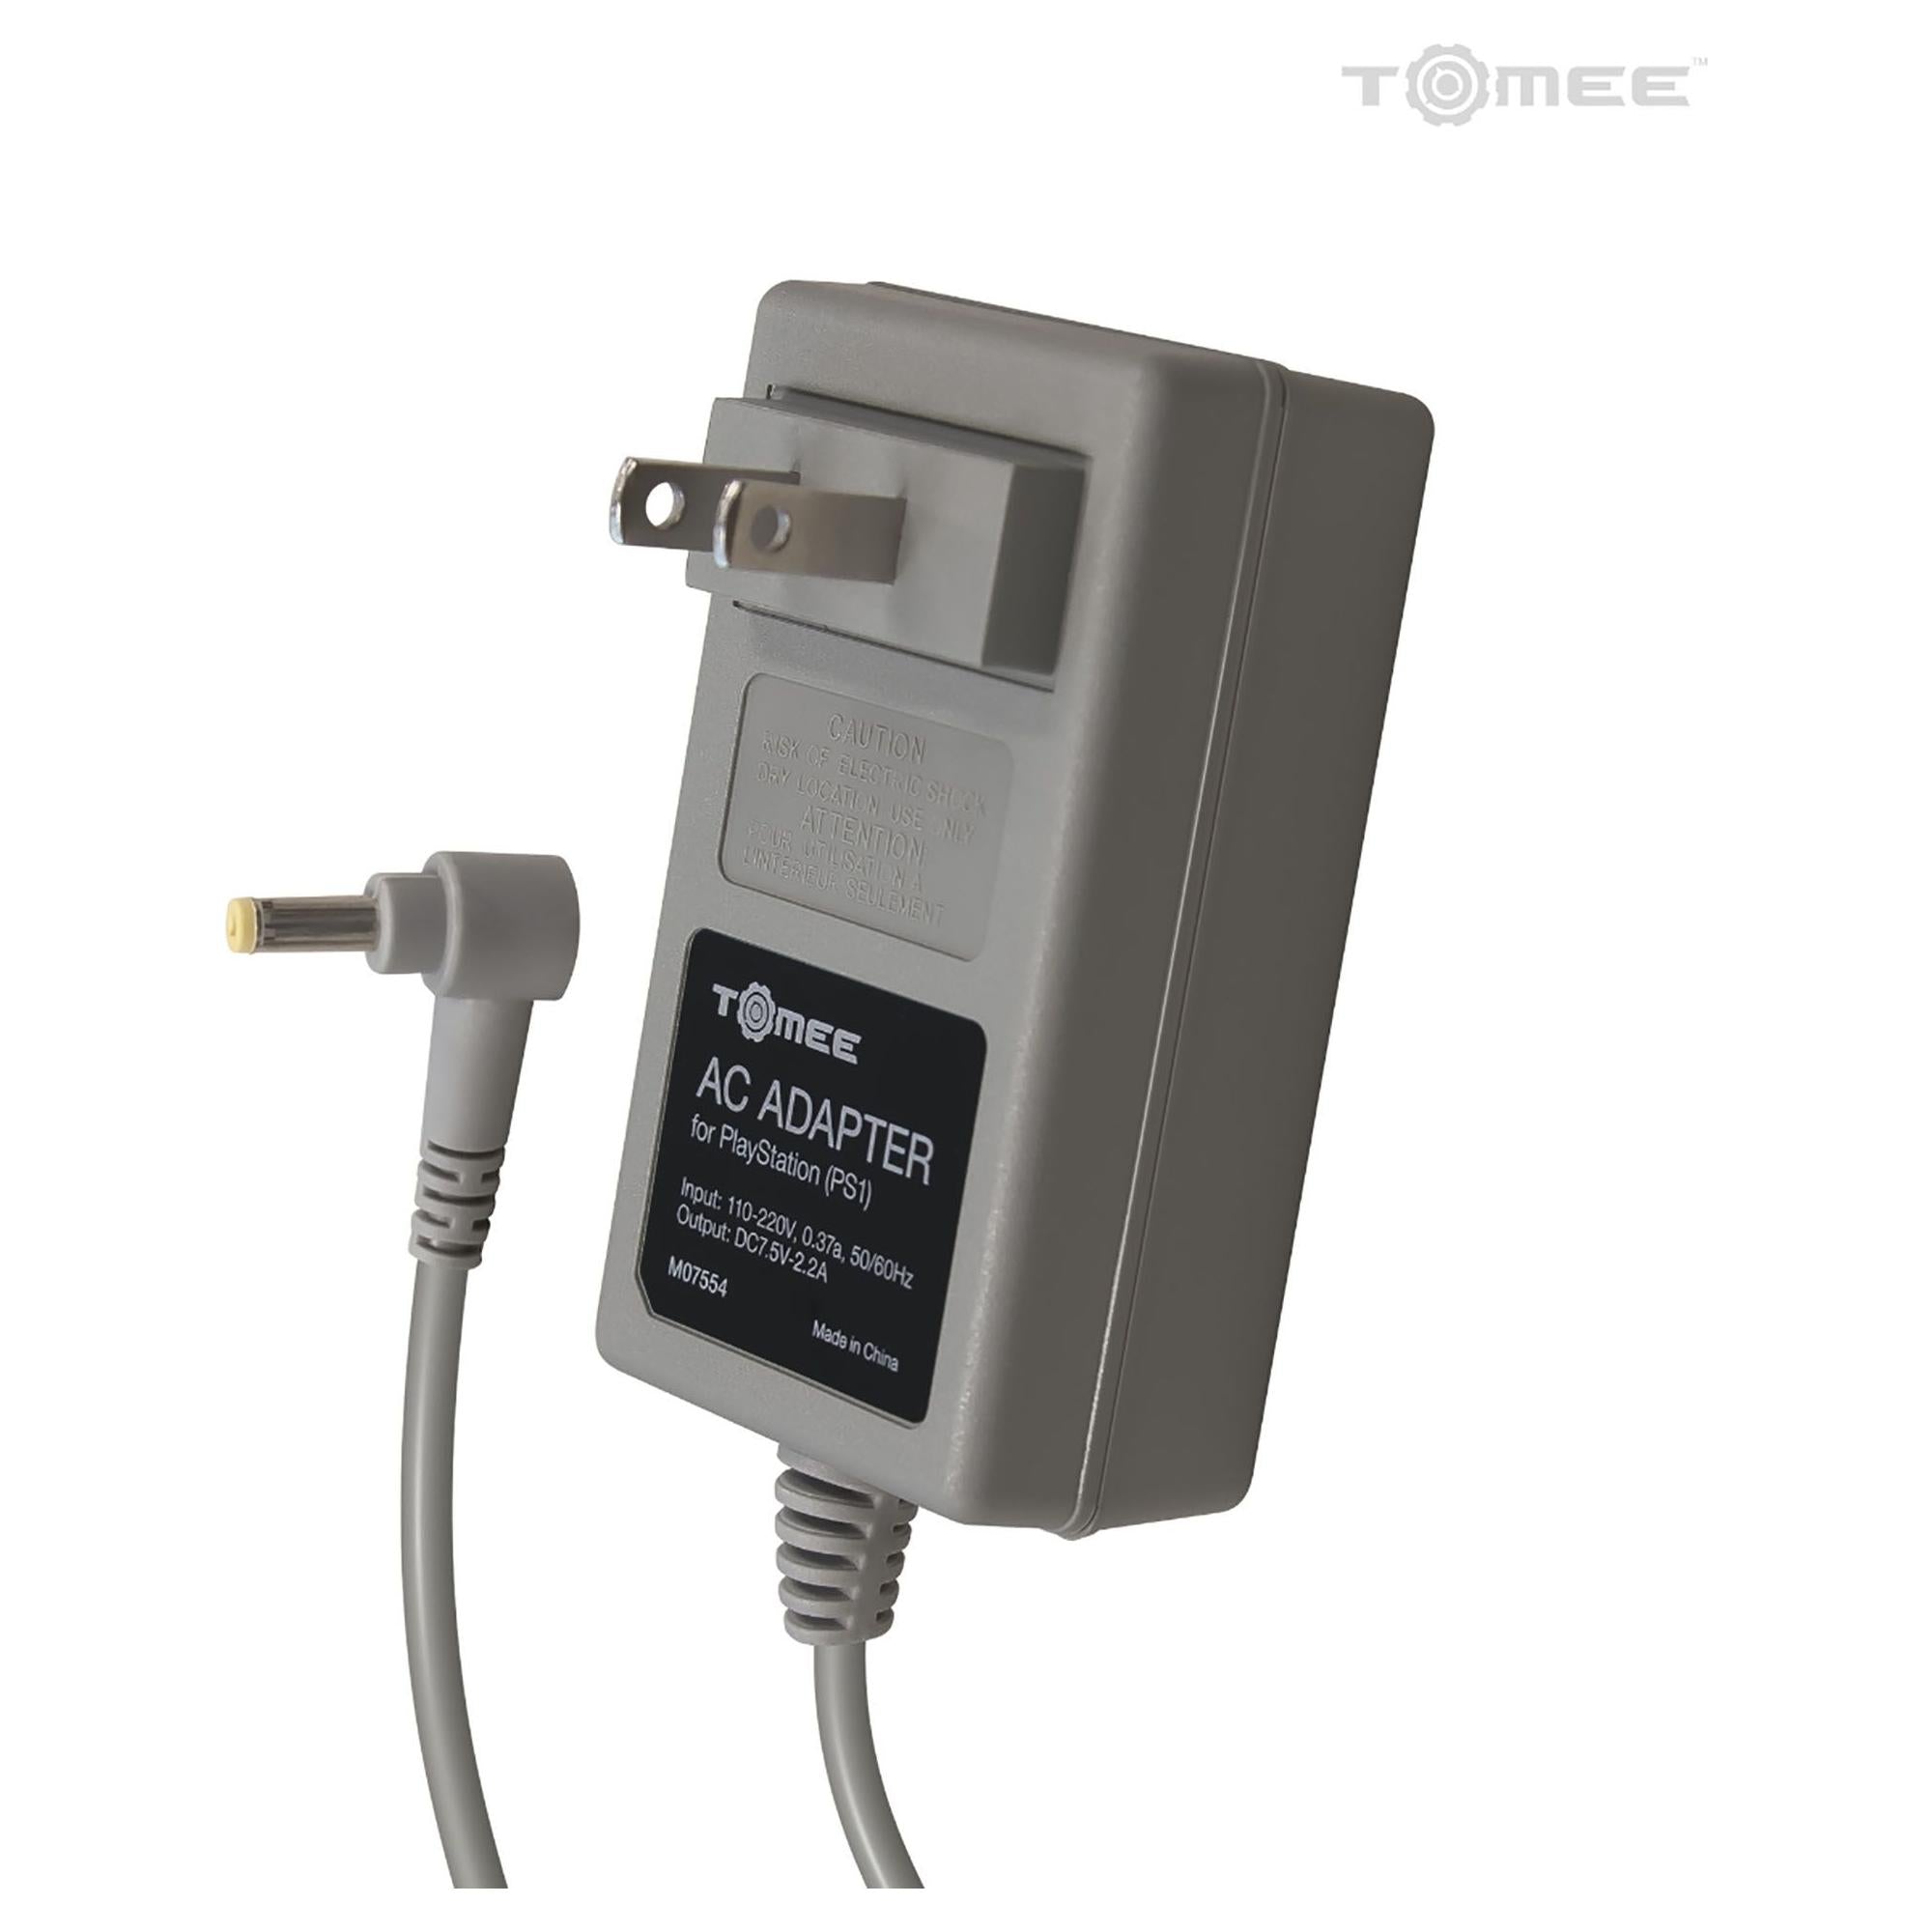 AC Adapter for PS One (PS1)